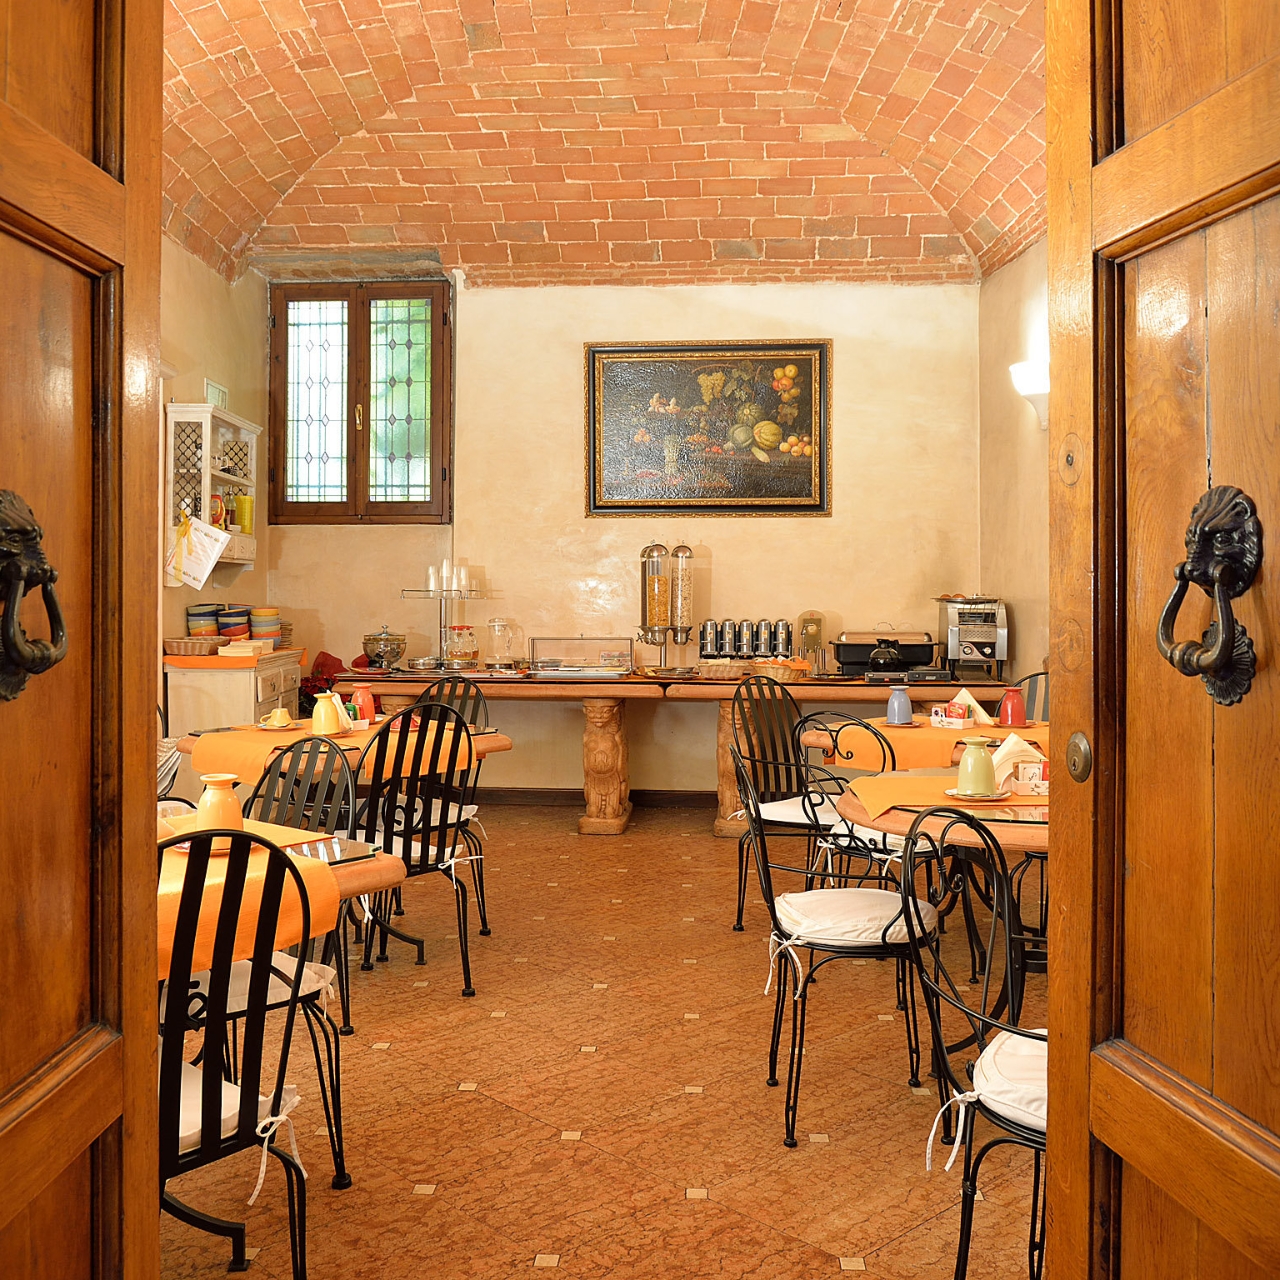 Porta Faenza Hotel - 3 HRS star hotel in Florence (Tuscany)